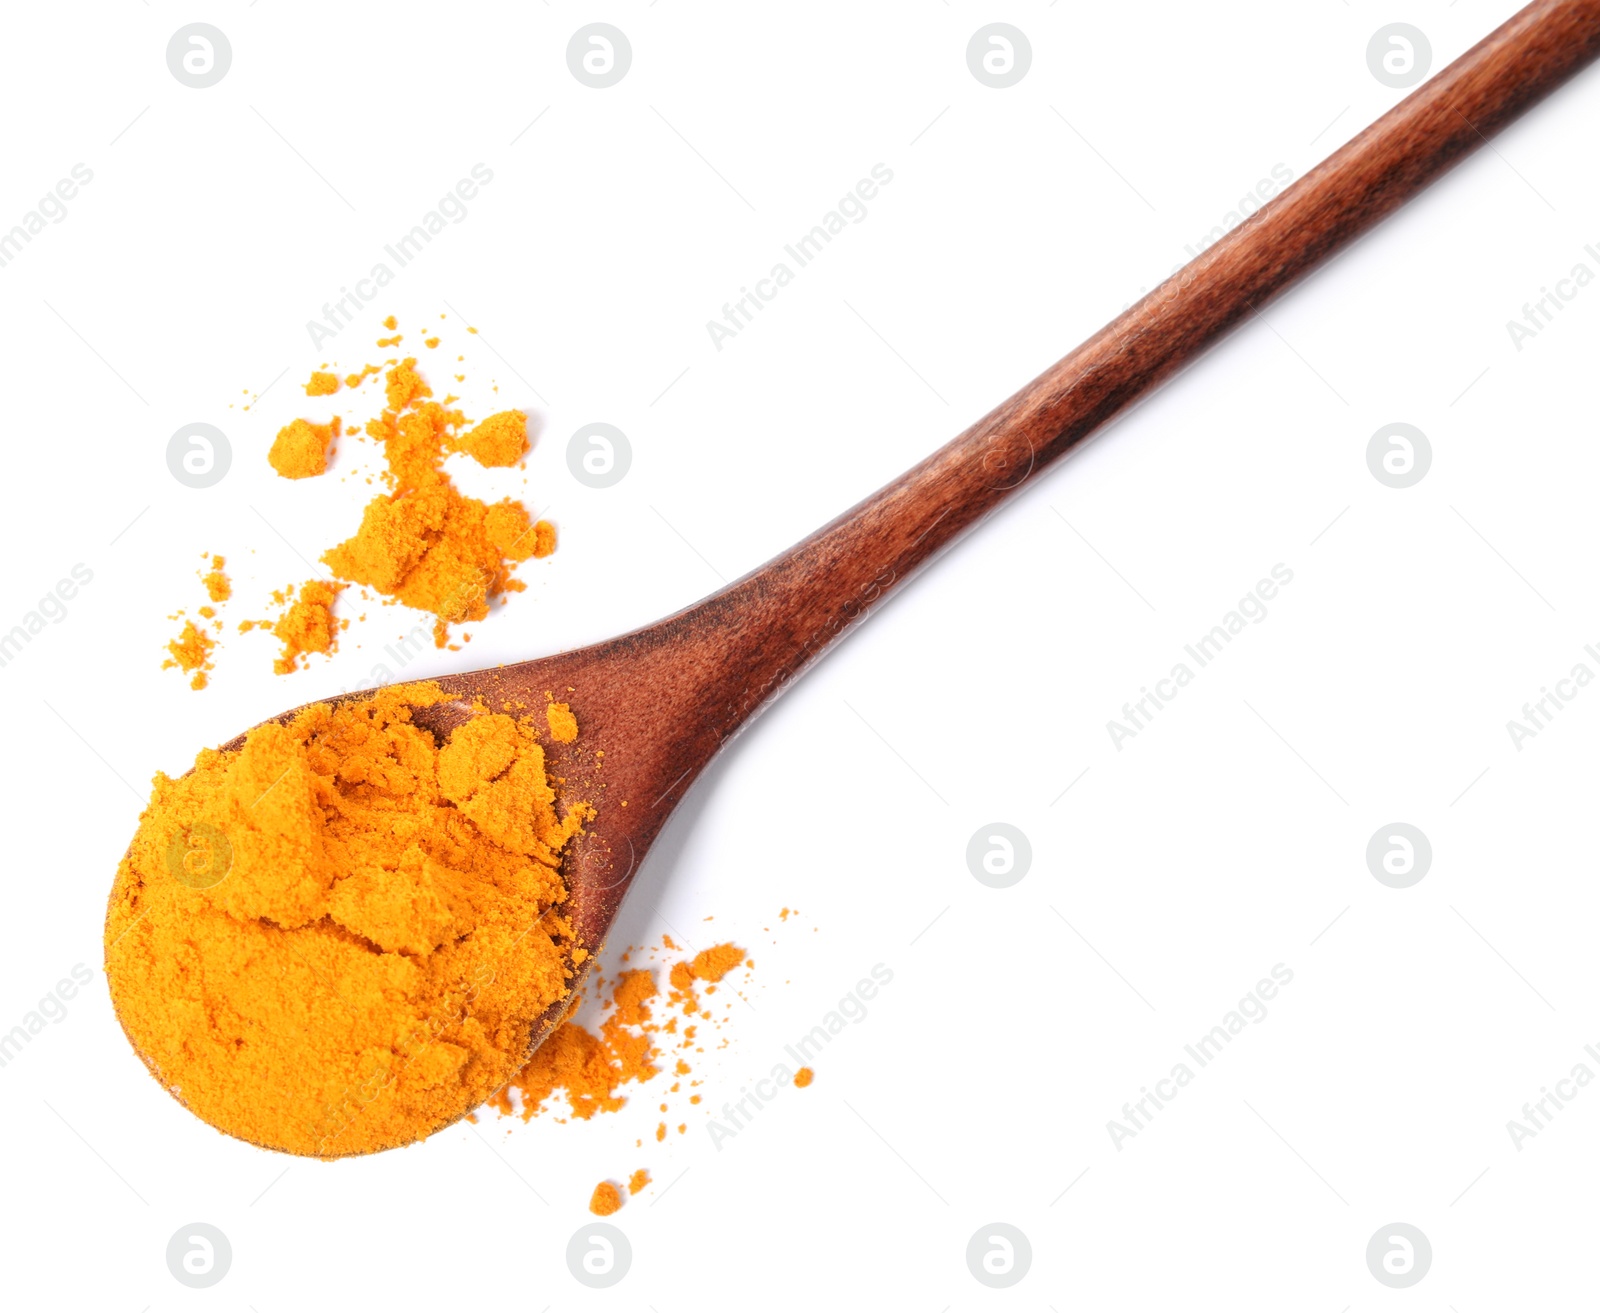 Photo of Wooden spoon with saffron powder on white background, top view